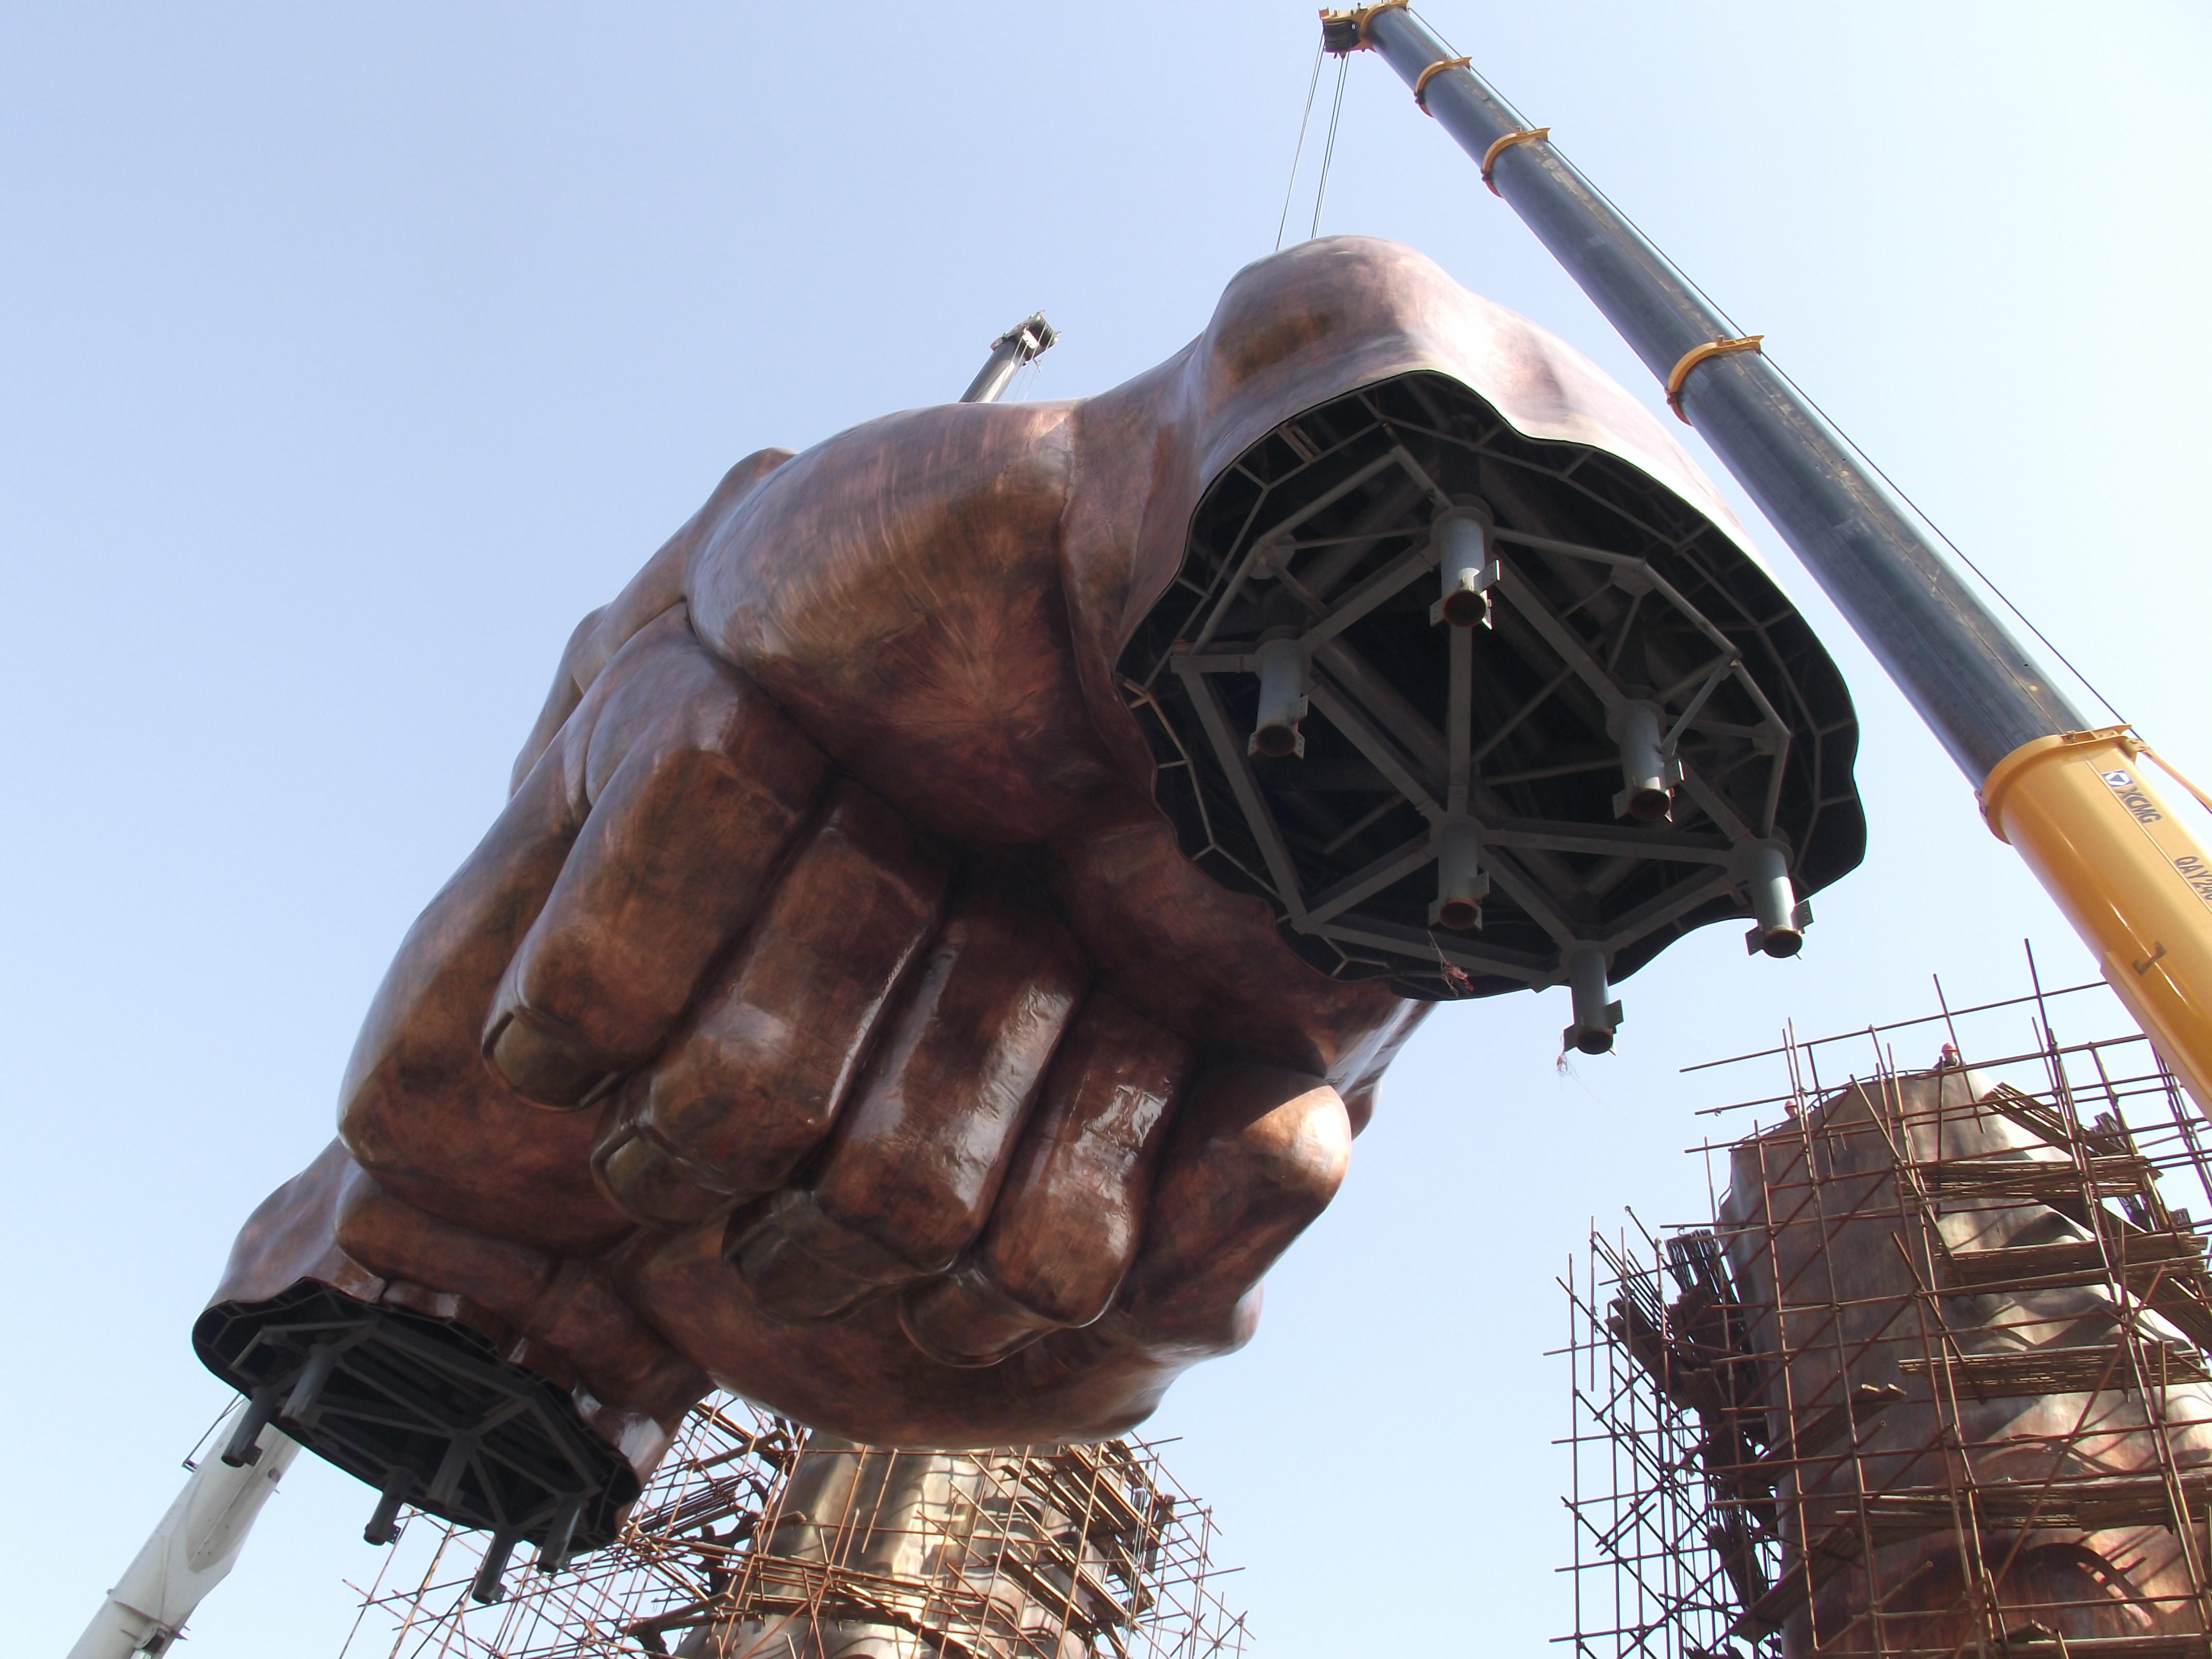 hoisting fixation of the large scale bronze hand sculpture